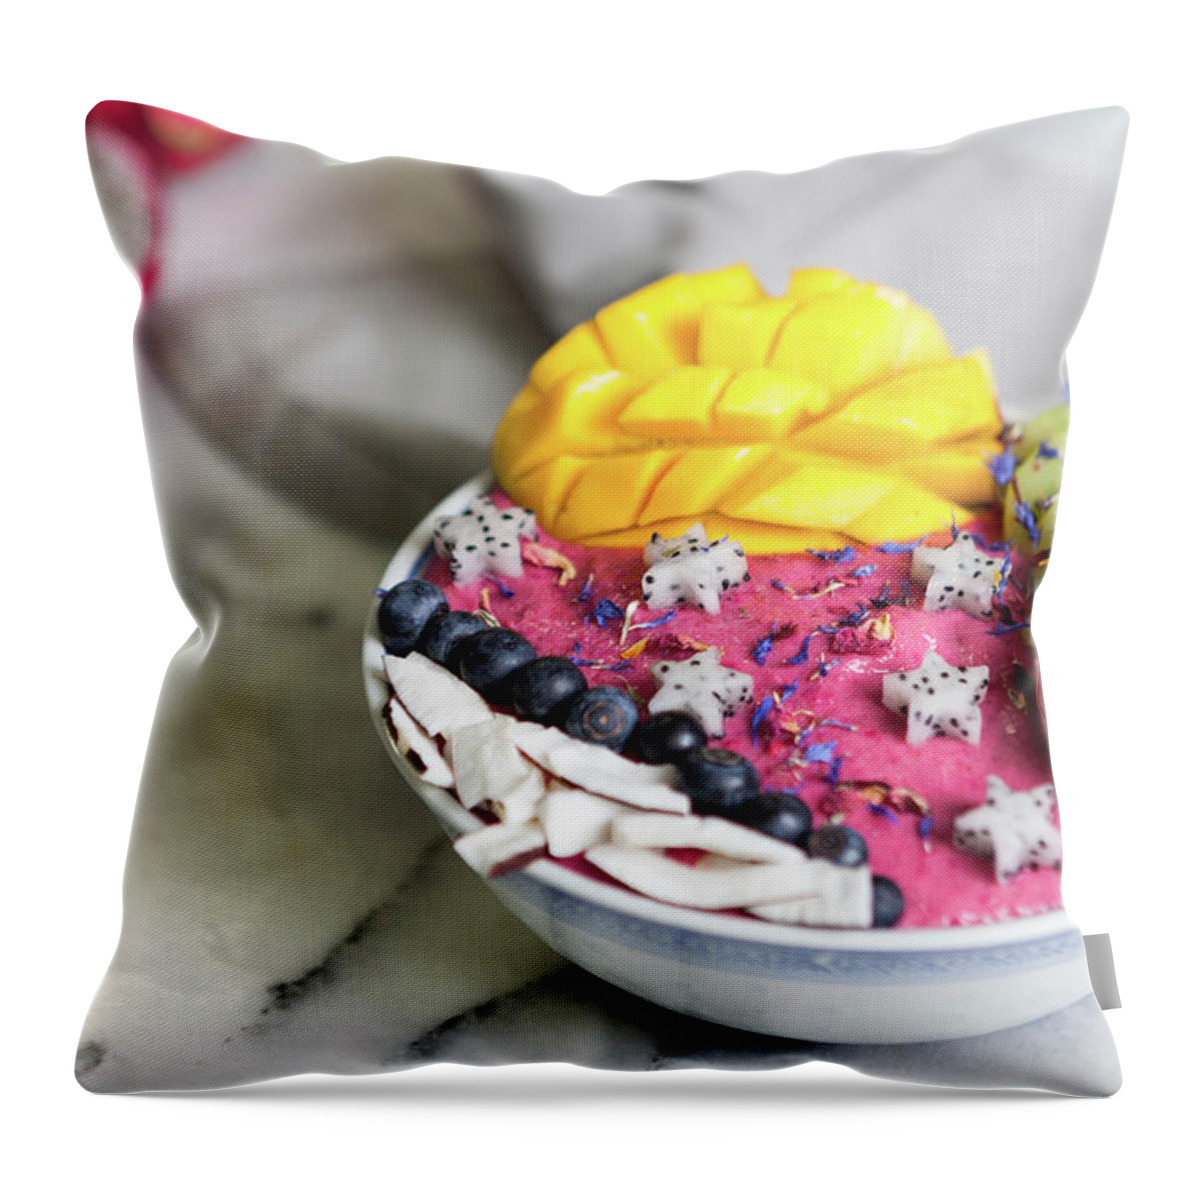 Ip_12409020 Throw Pillow featuring the photograph A Smoothie Bowl With Exotic Fruit by Jalag / Intosite Kitchengirls